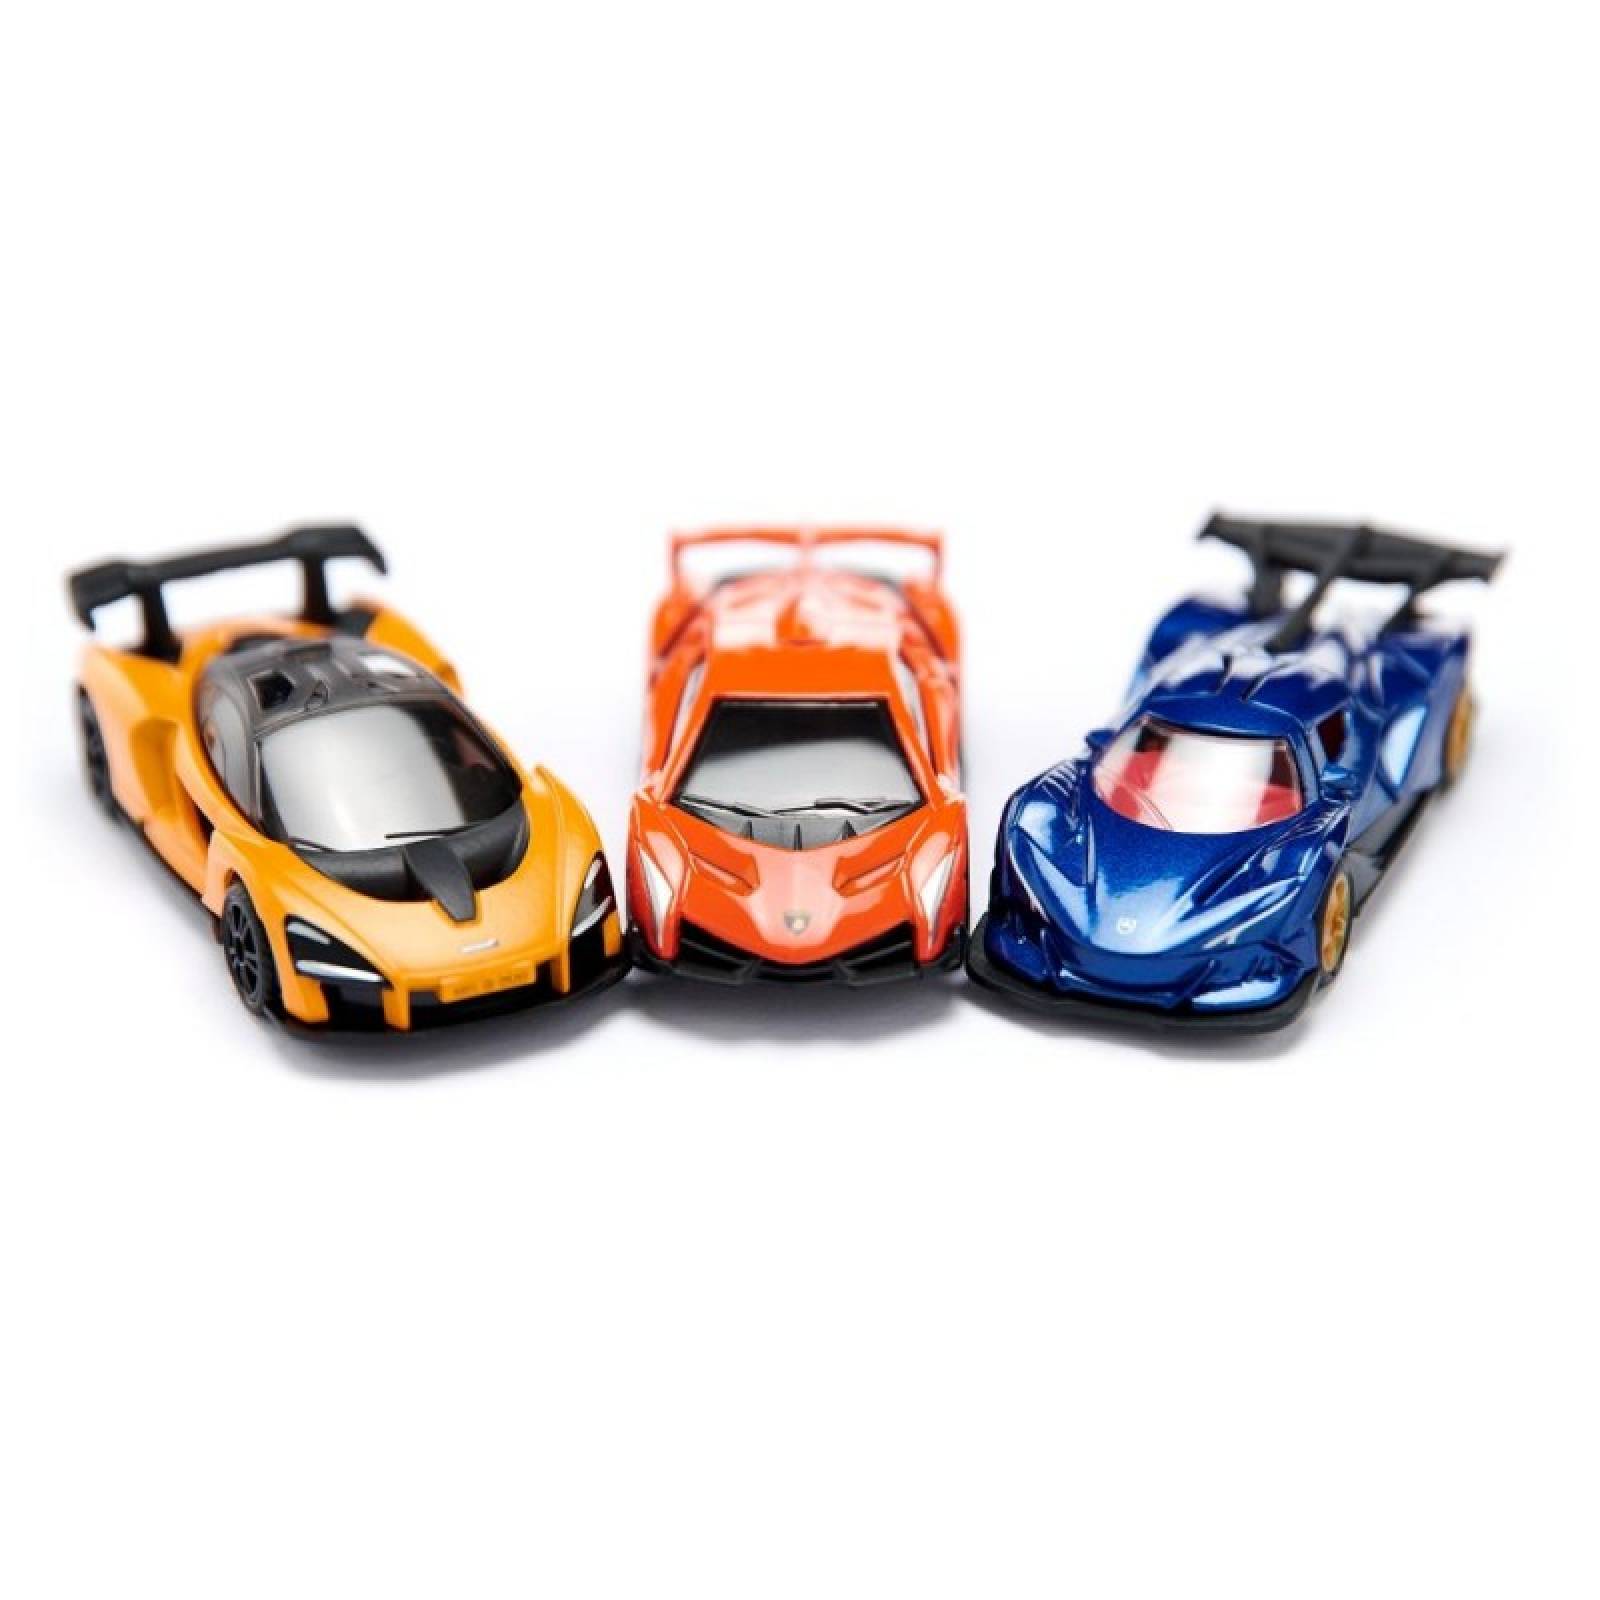 Supercars Gift Set - 3 x Single Die-Cast Toy Vehicles 6328 thumbnails